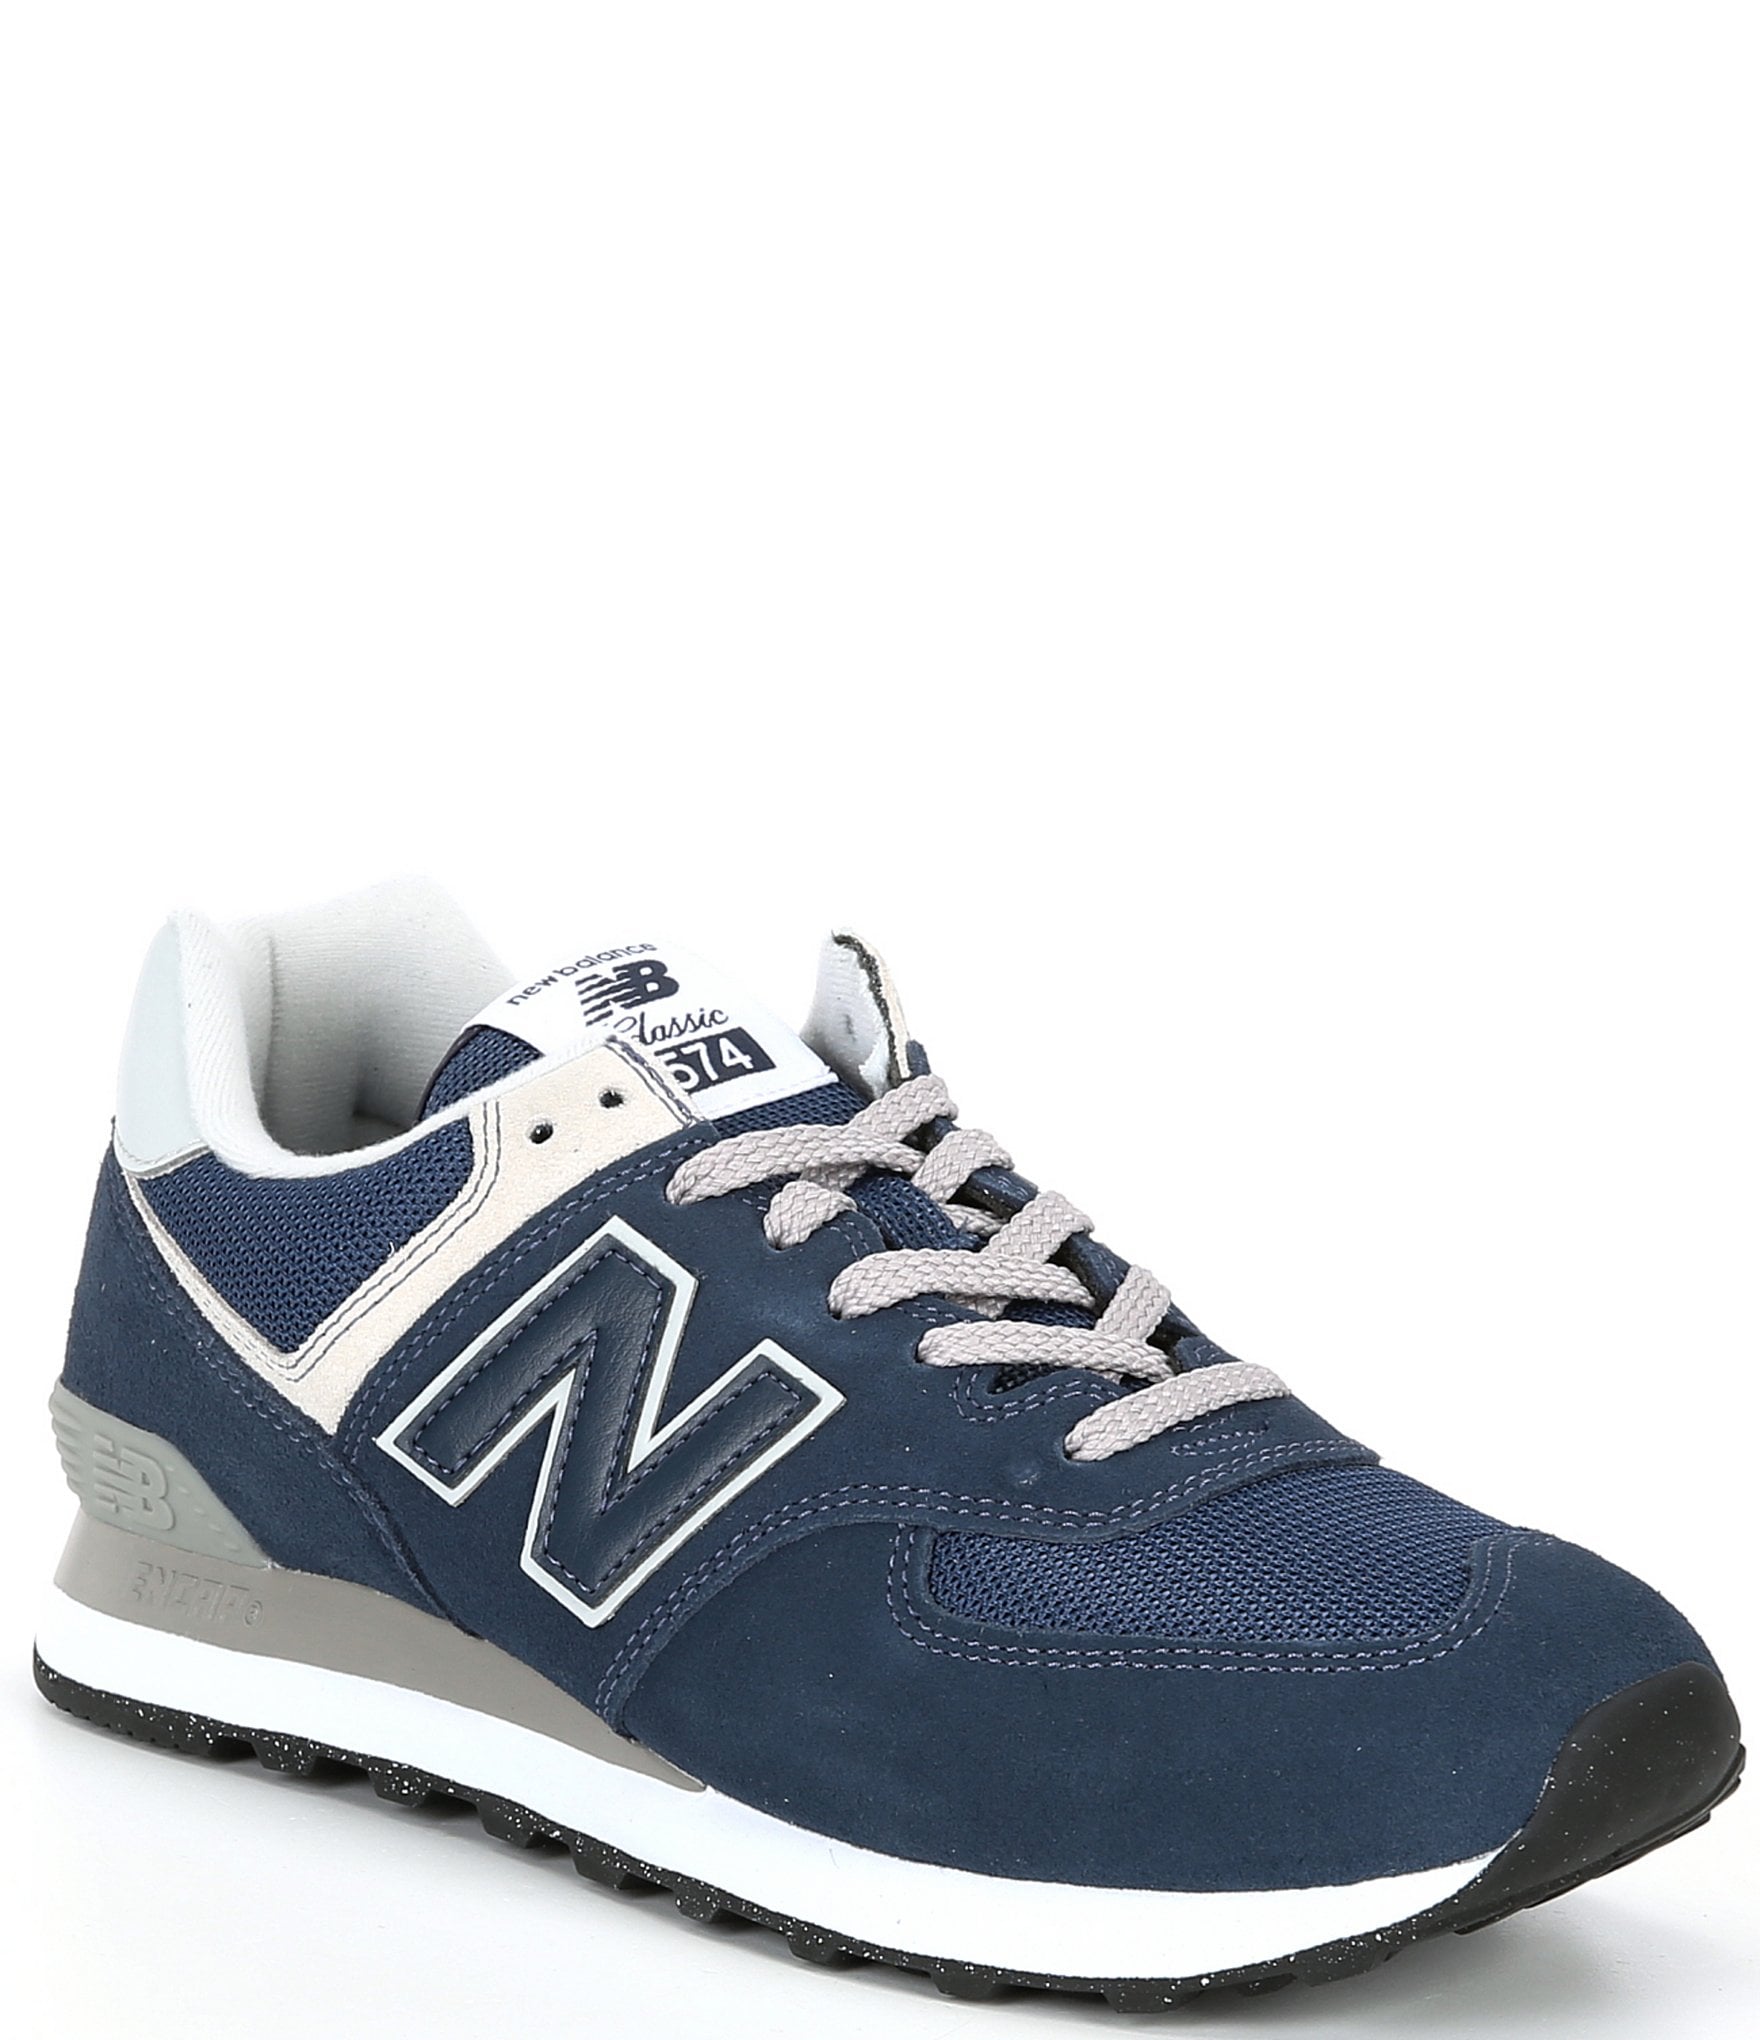 New Balance 574 Sneakers For Men